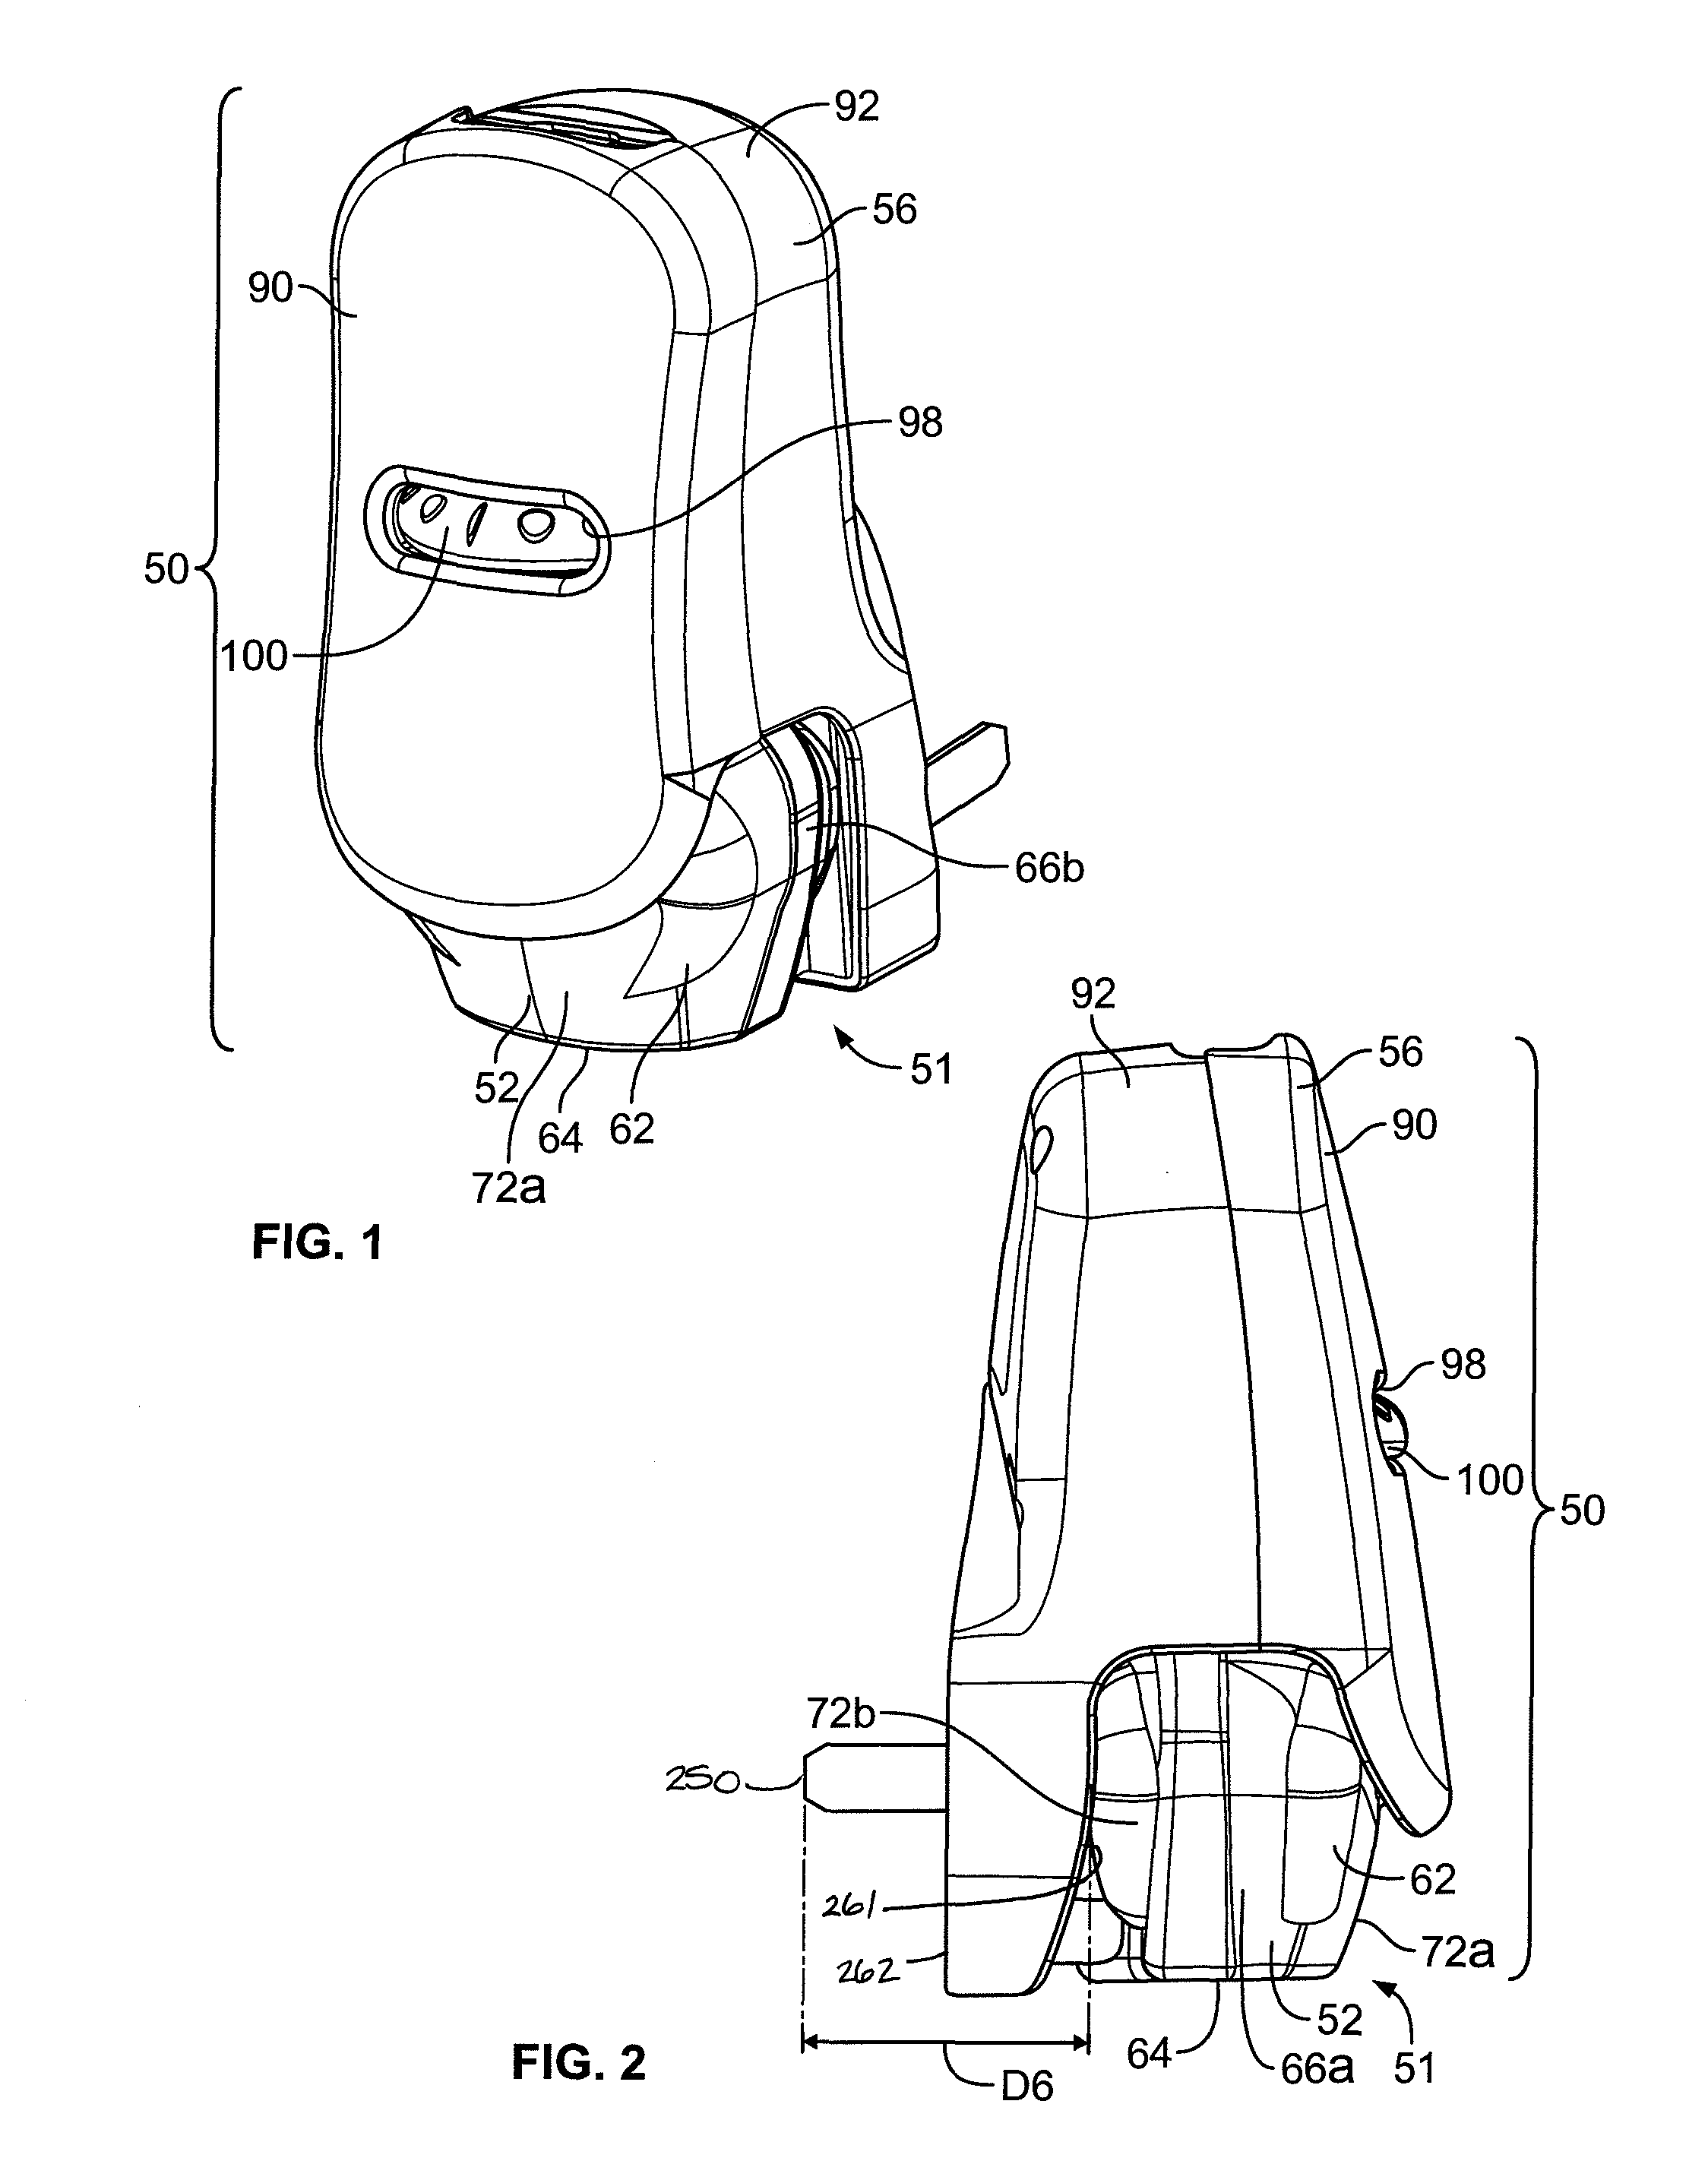 Rotatable plug assembly and housing for a volatile material dispenser